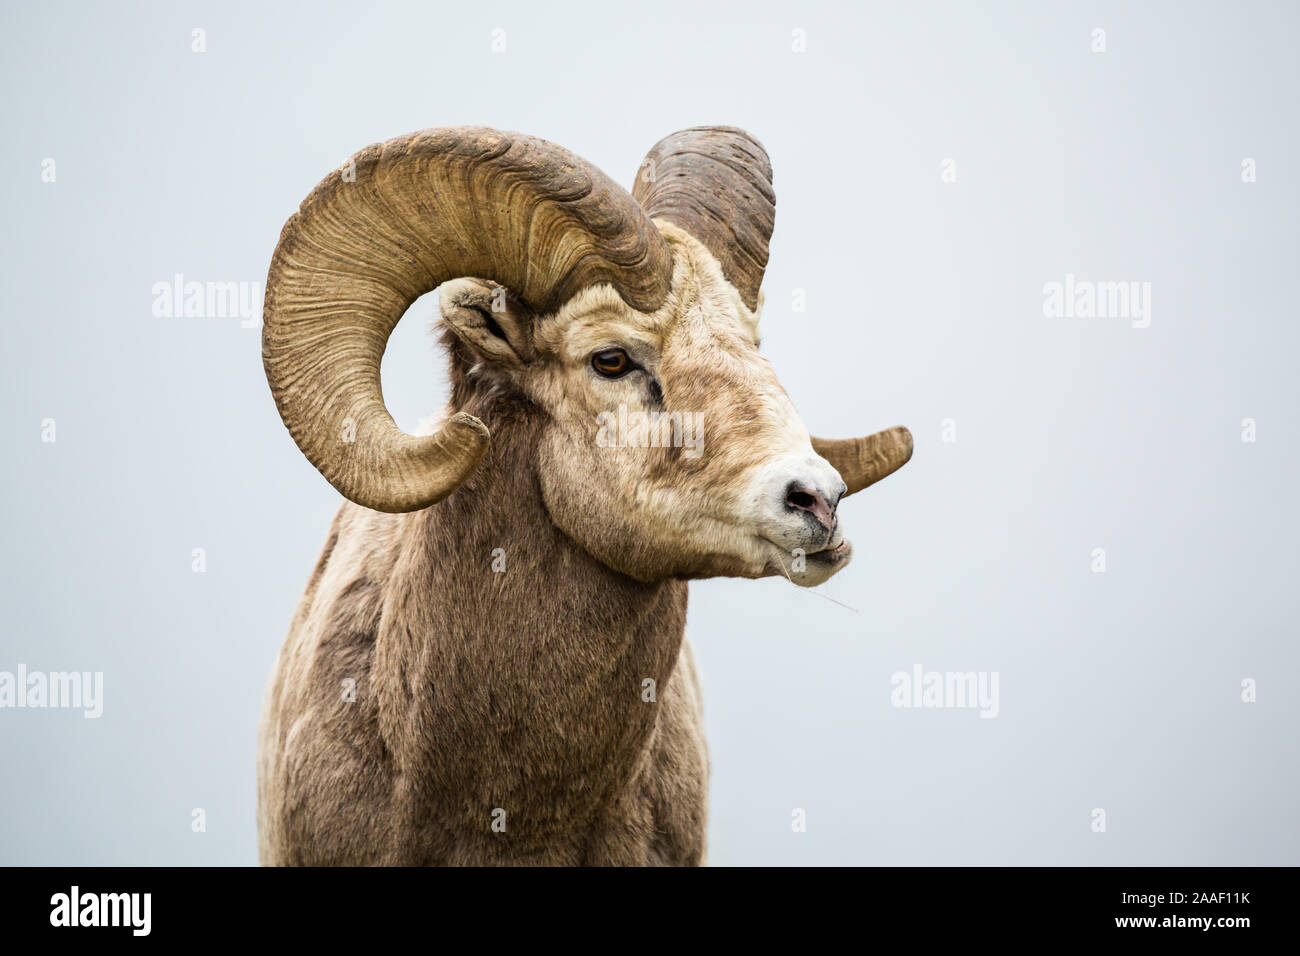 Male bighorn sheep munching on grass. His jaw sideways as he chews his food in southern Canada near Montana. Stock Photo